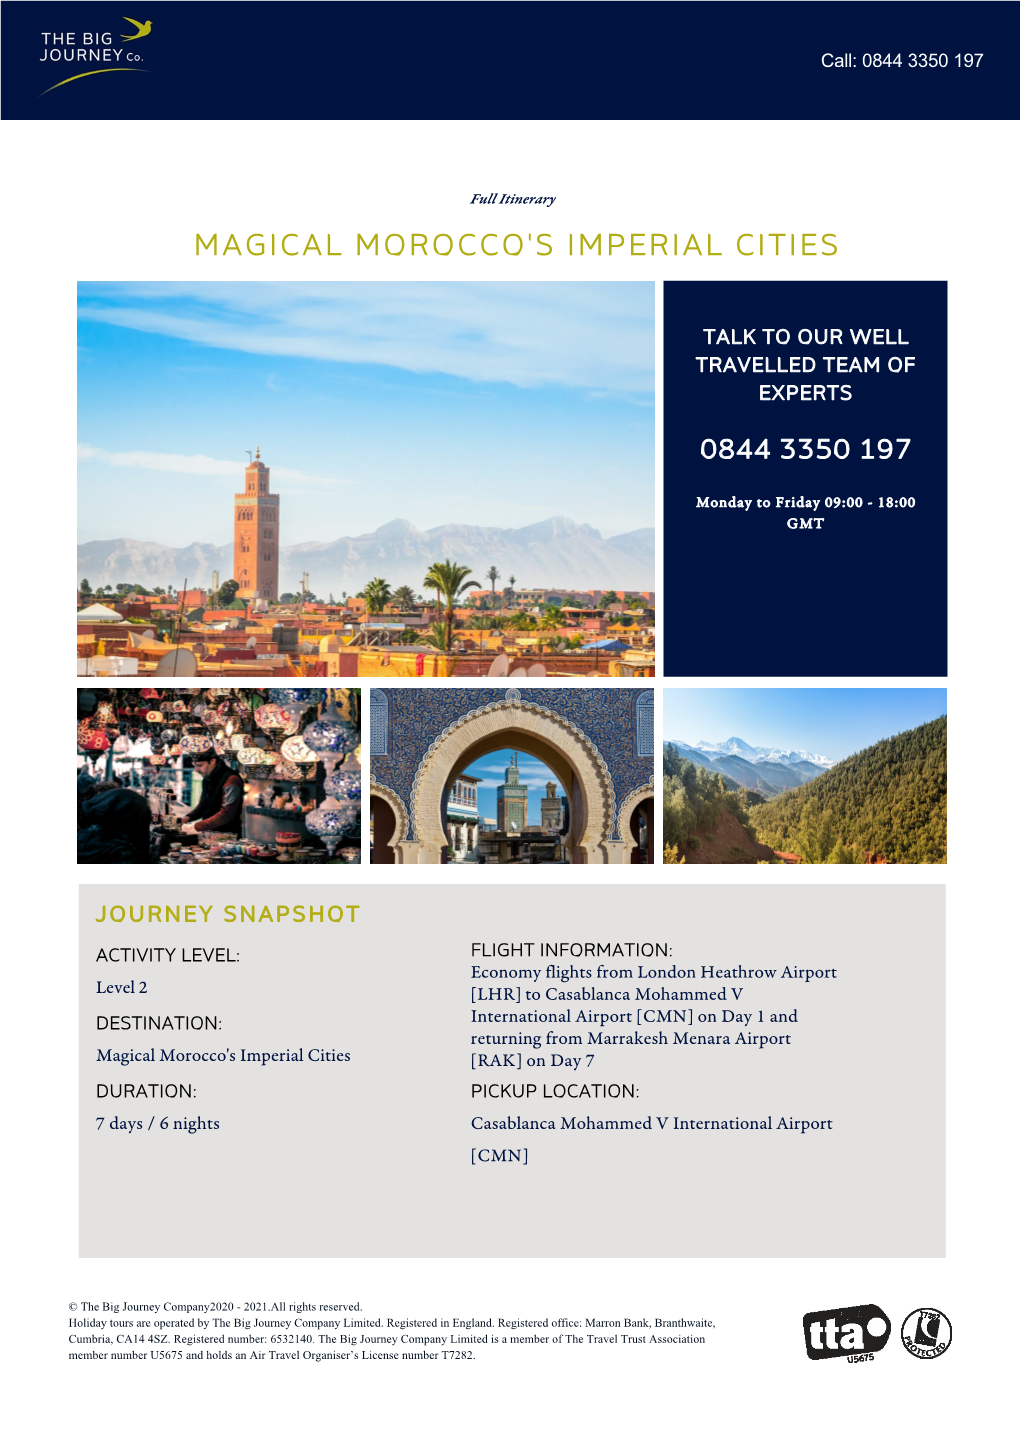 Magical Morocco's Imperial Cities